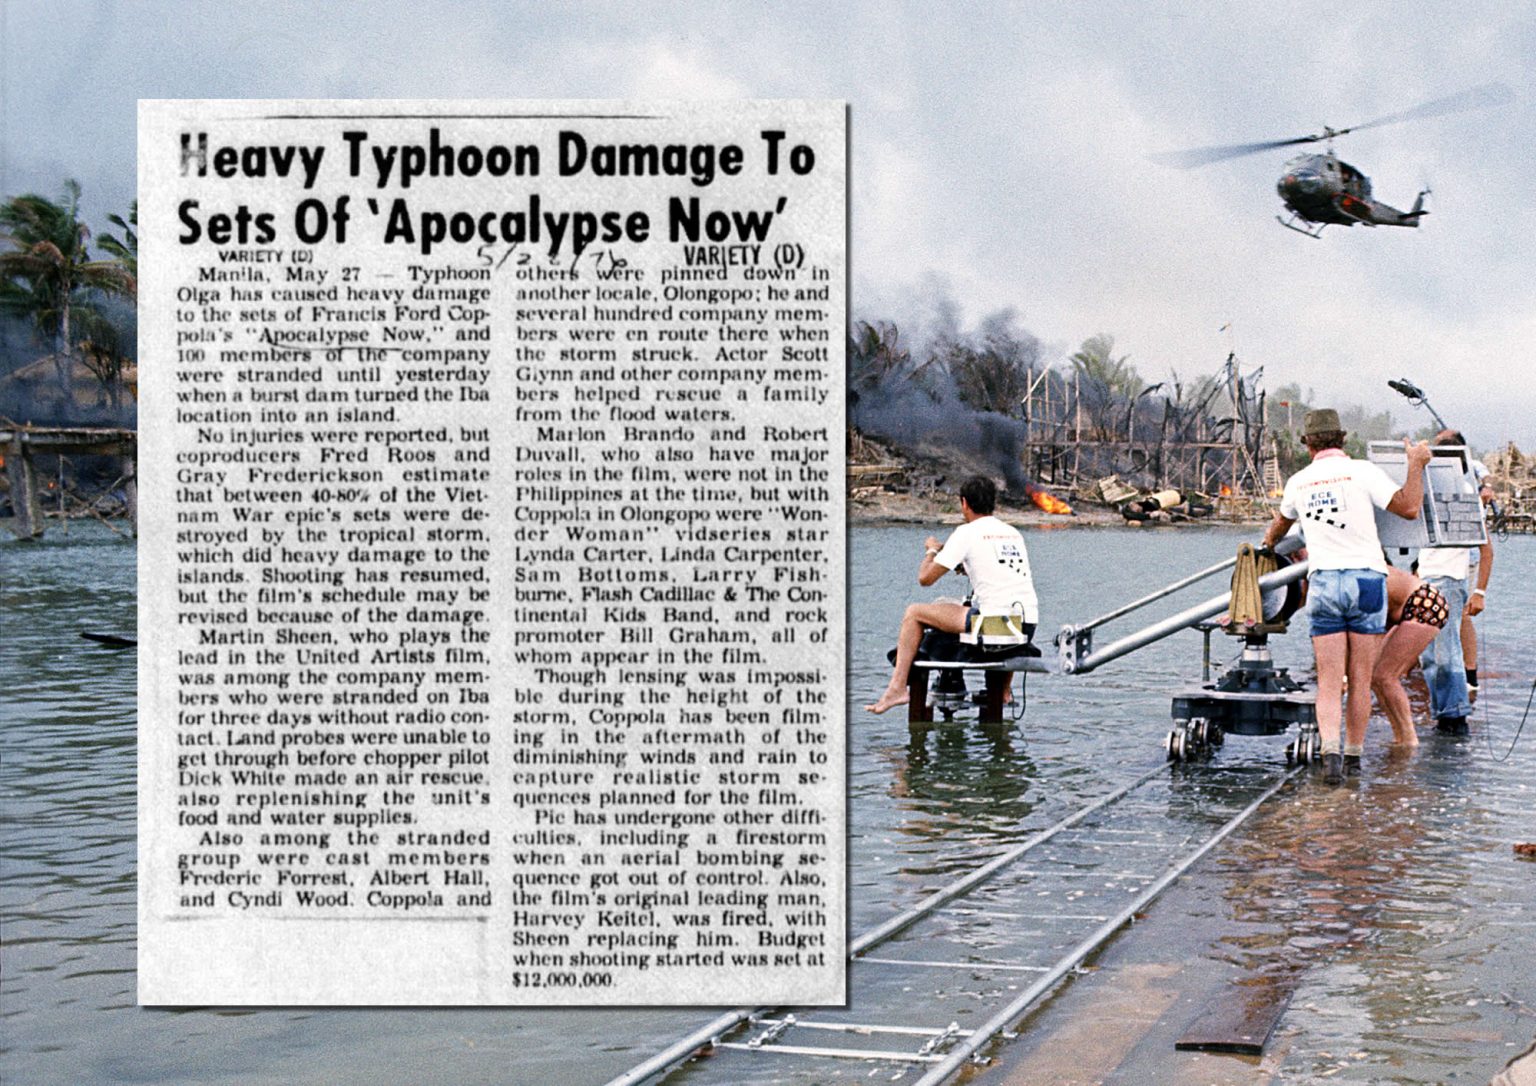 In May of 1976, a massive typhoon caused extensive damage to the sets of Ap...